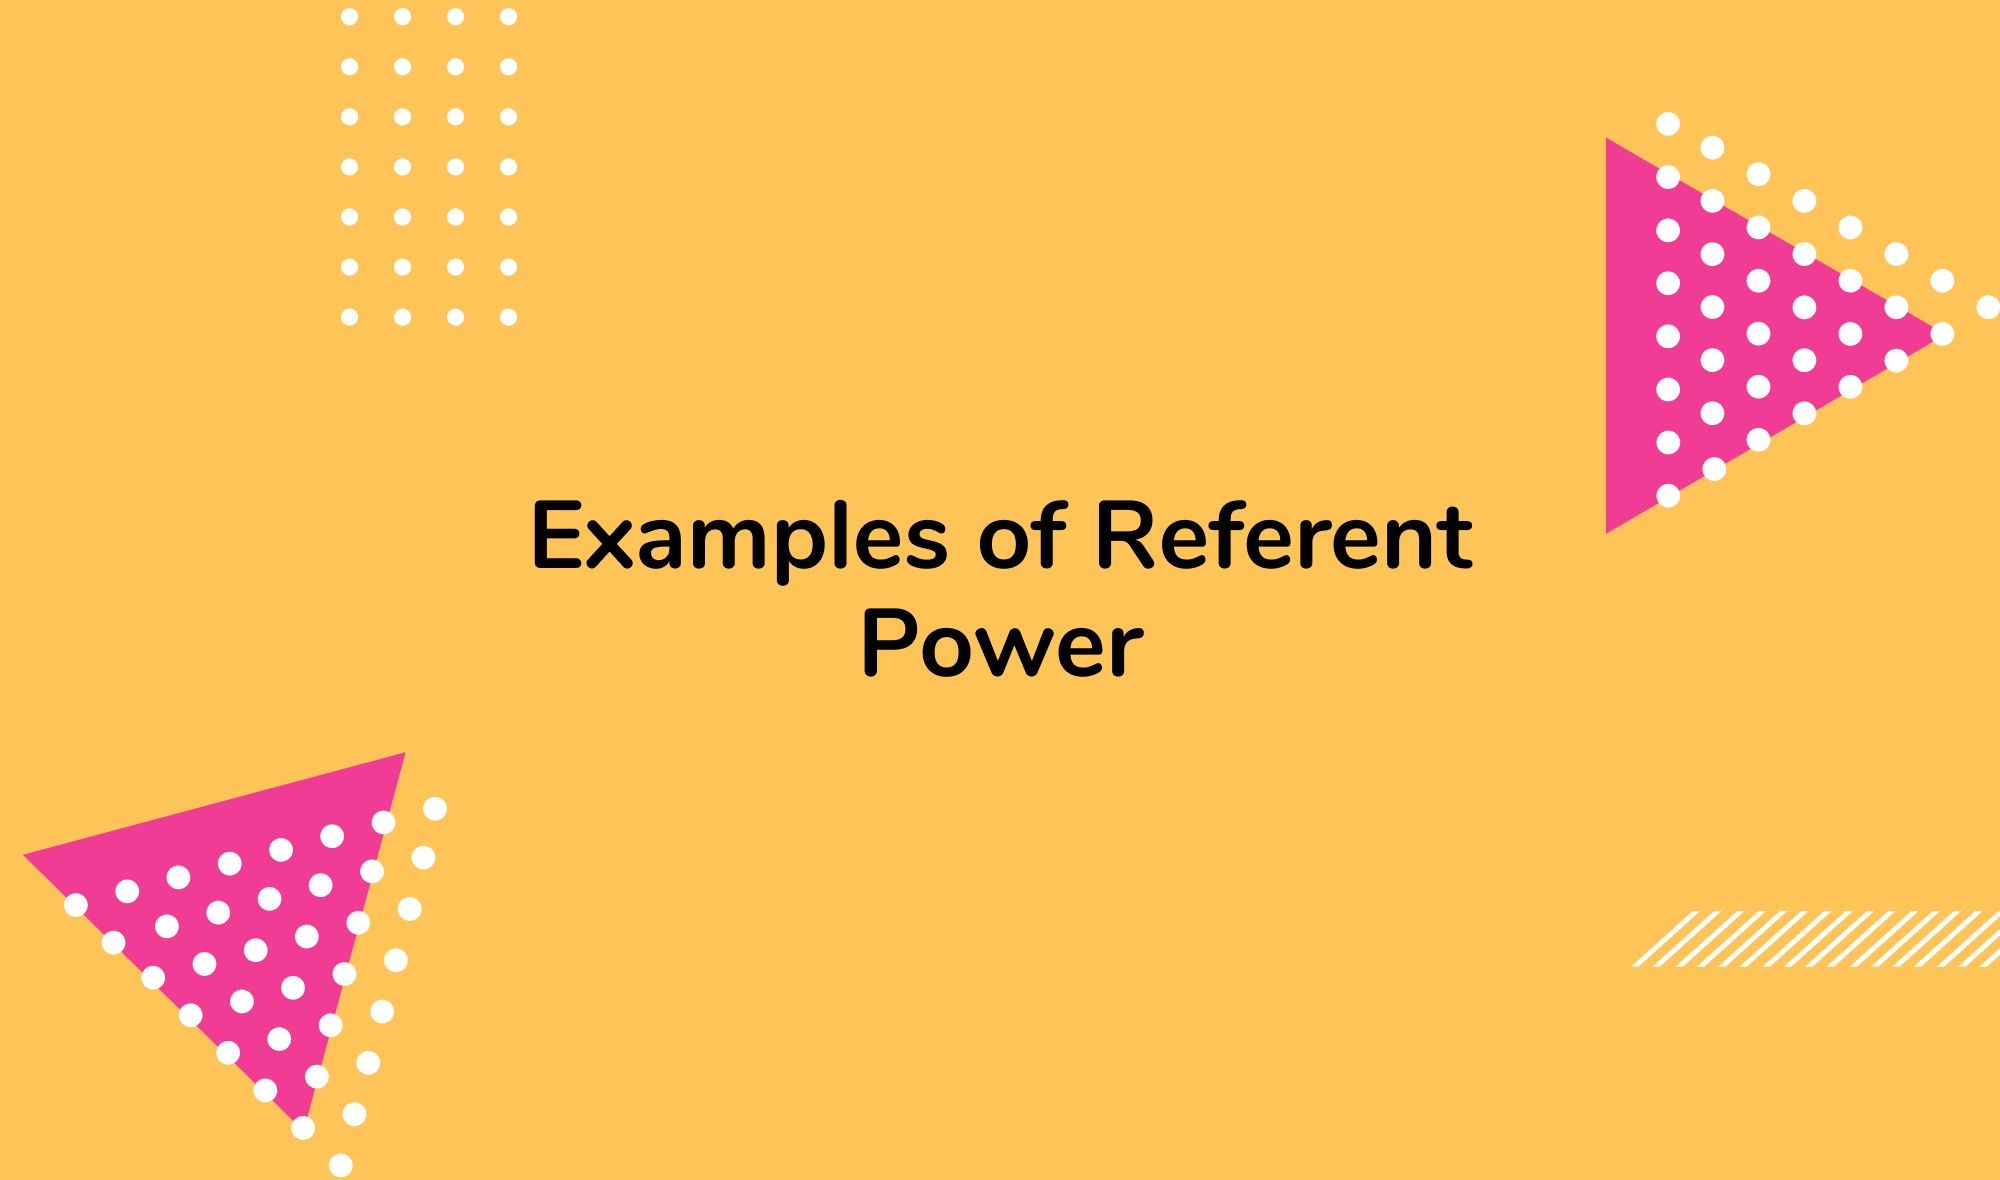 Examples of Referent Power